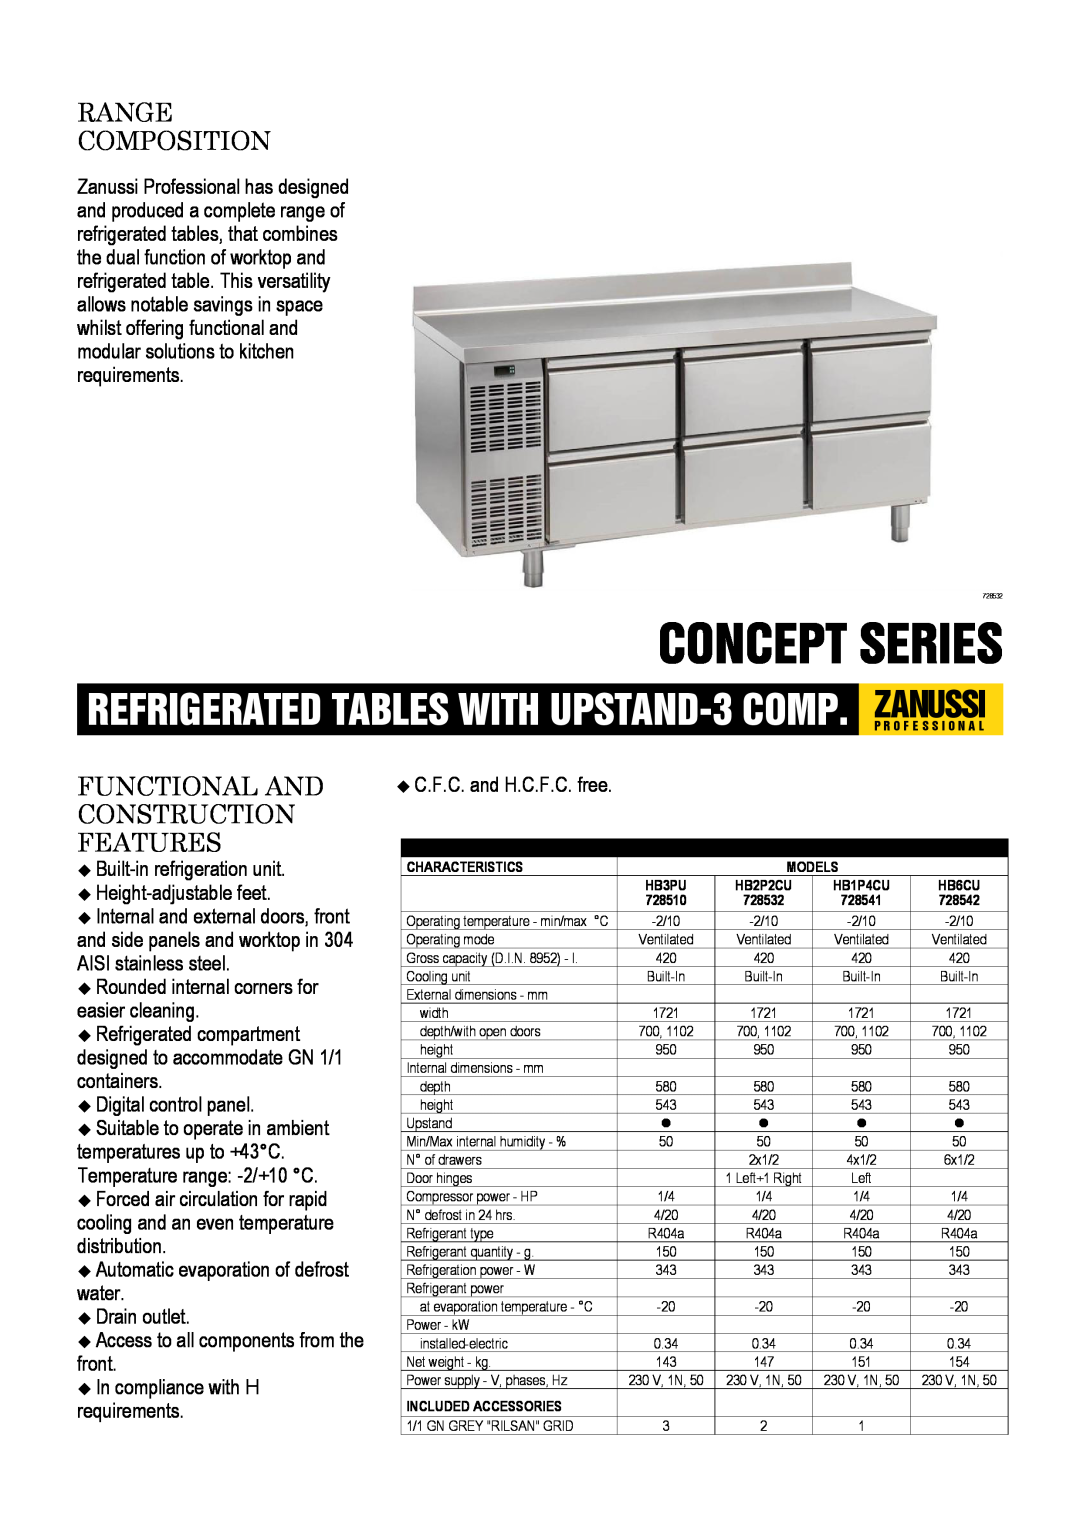 Zanussi 728541, 728532, 728510, 728542 dimensions Concept Series, Range Composition, Functional And Construction Features 